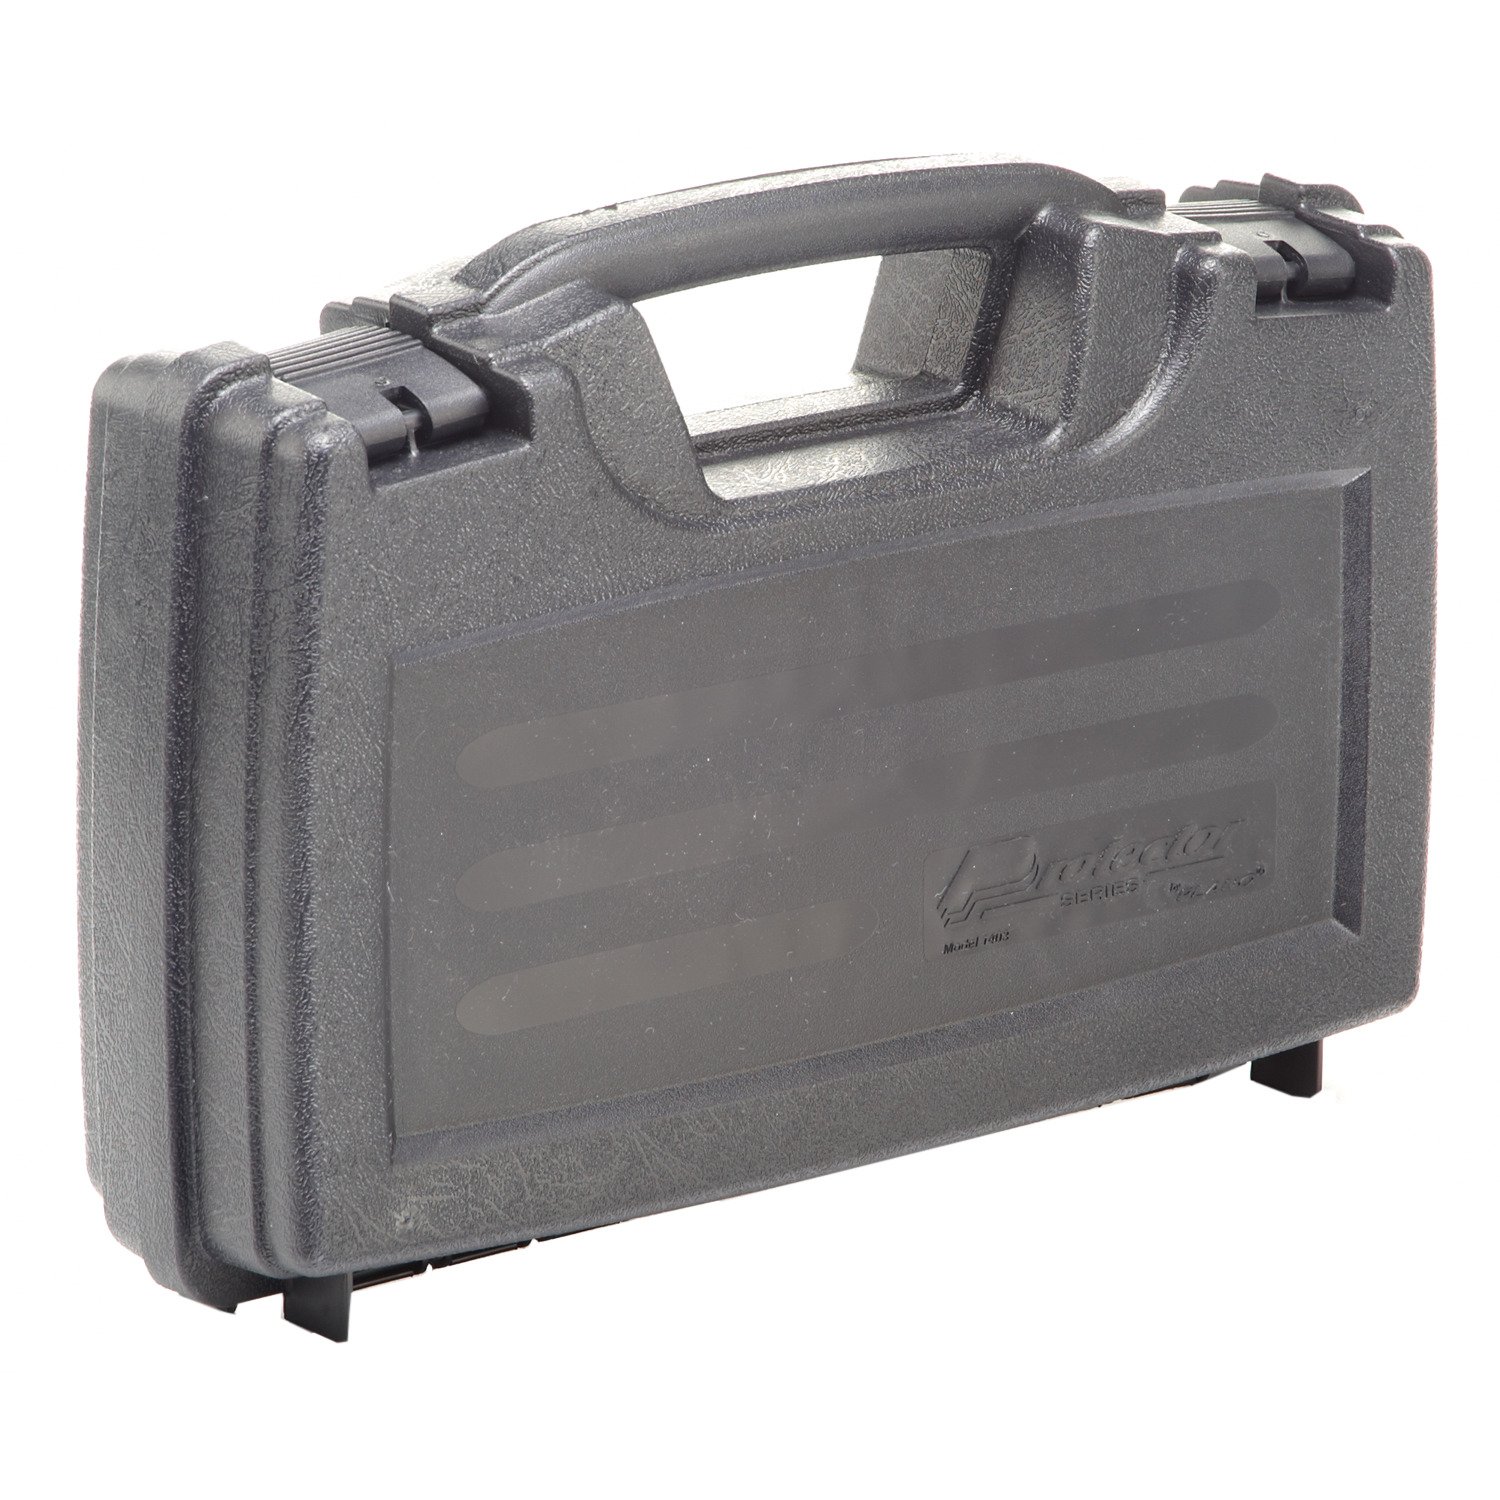 Plano Protector Single Pistol Case                                                                                               - view number 1 selected